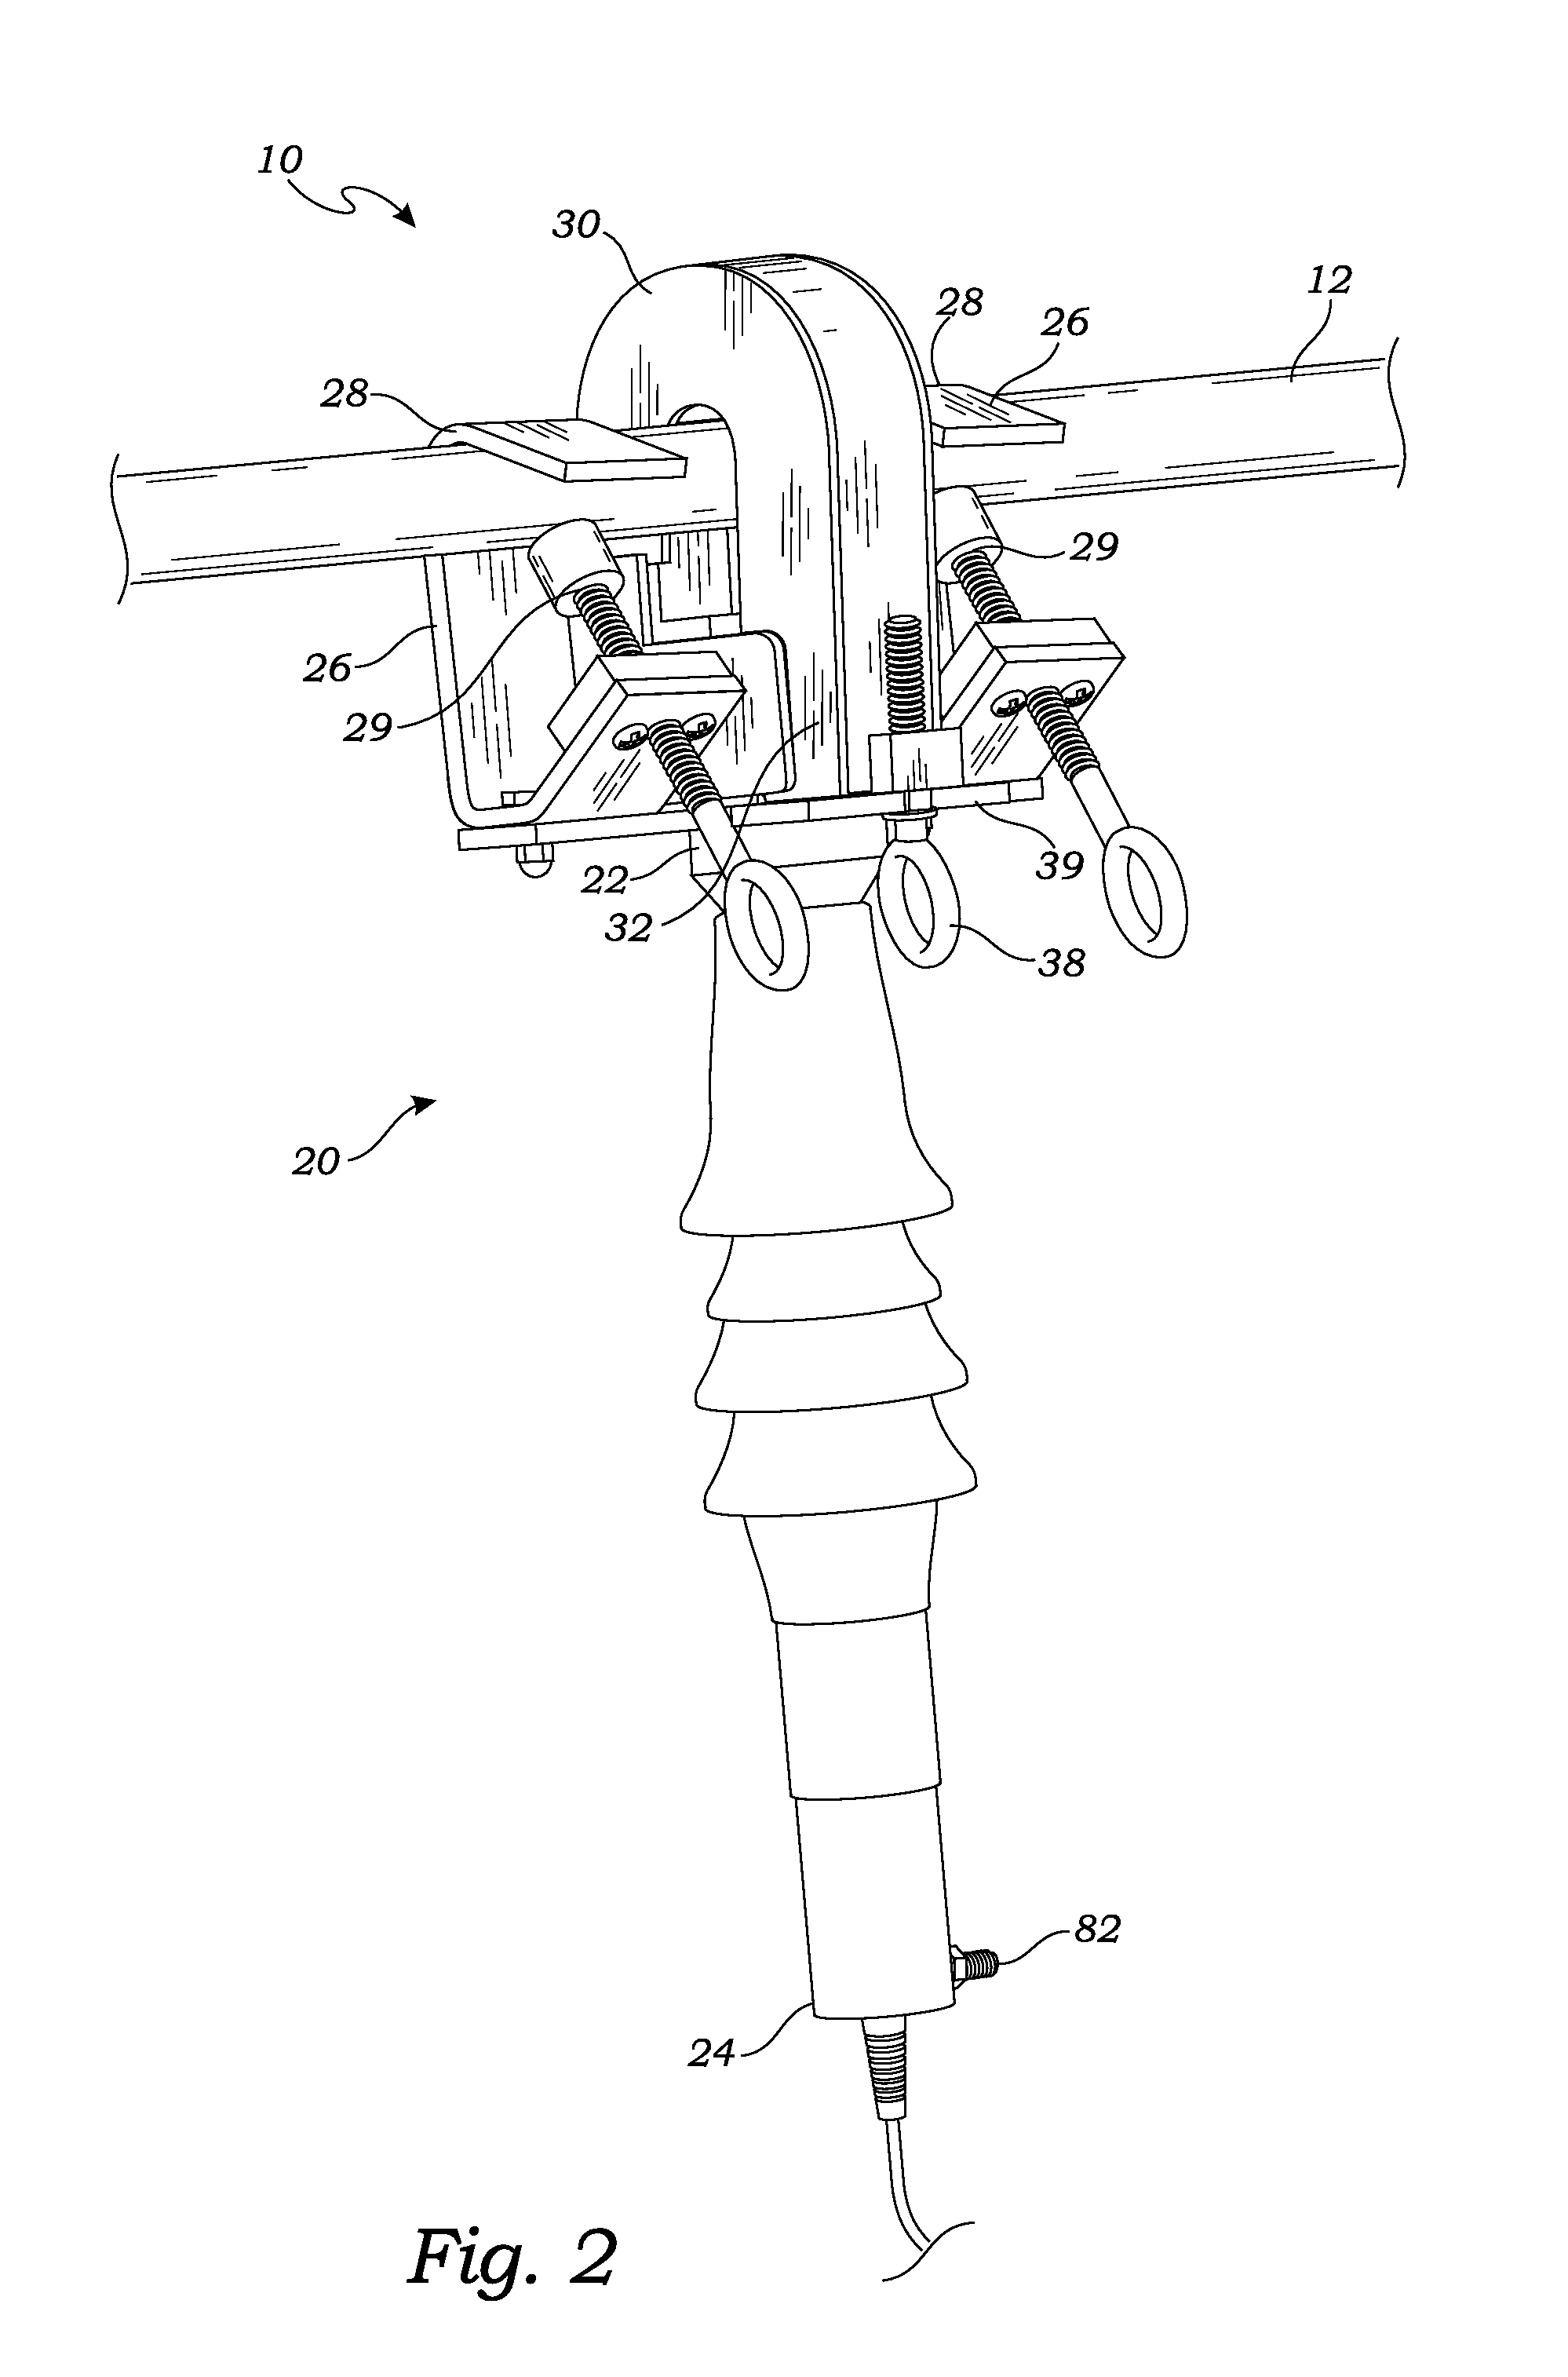 Optical sensor assembly for installation on a current carrying cable